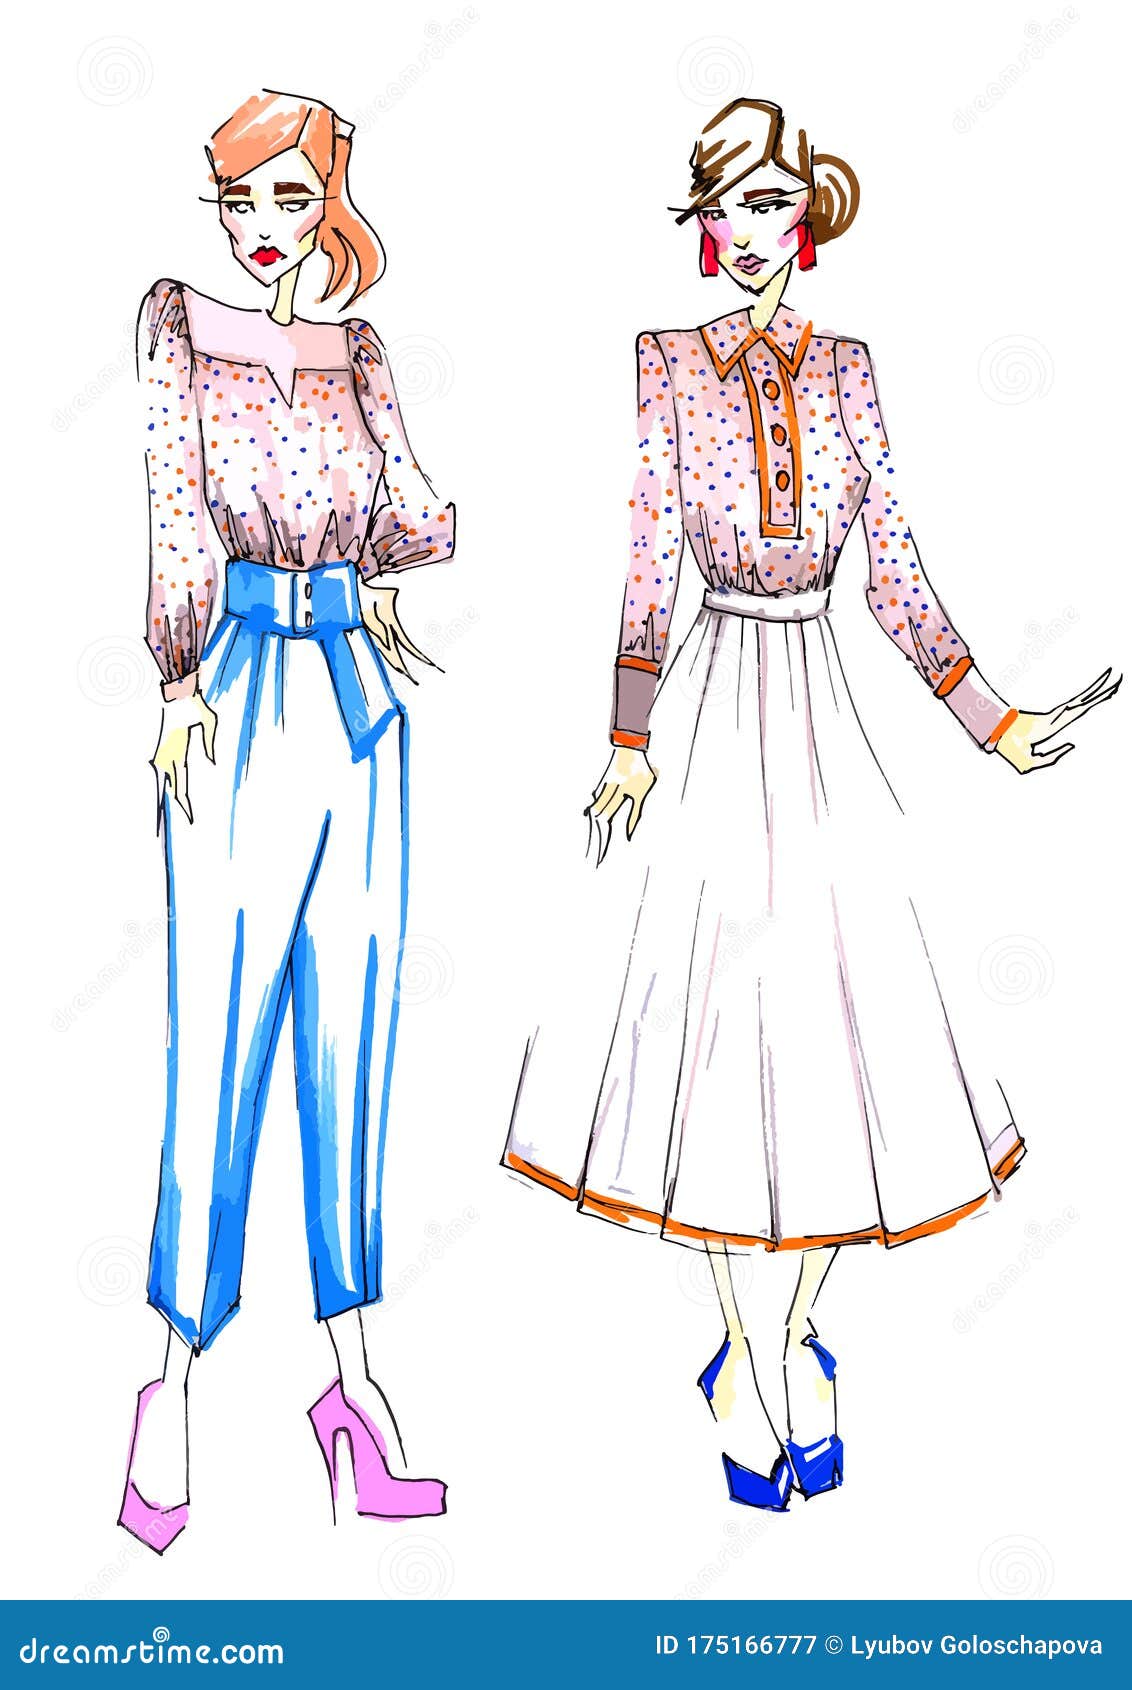 268700 Fashion Sketch Stock Photos Pictures  RoyaltyFree Images   iStock